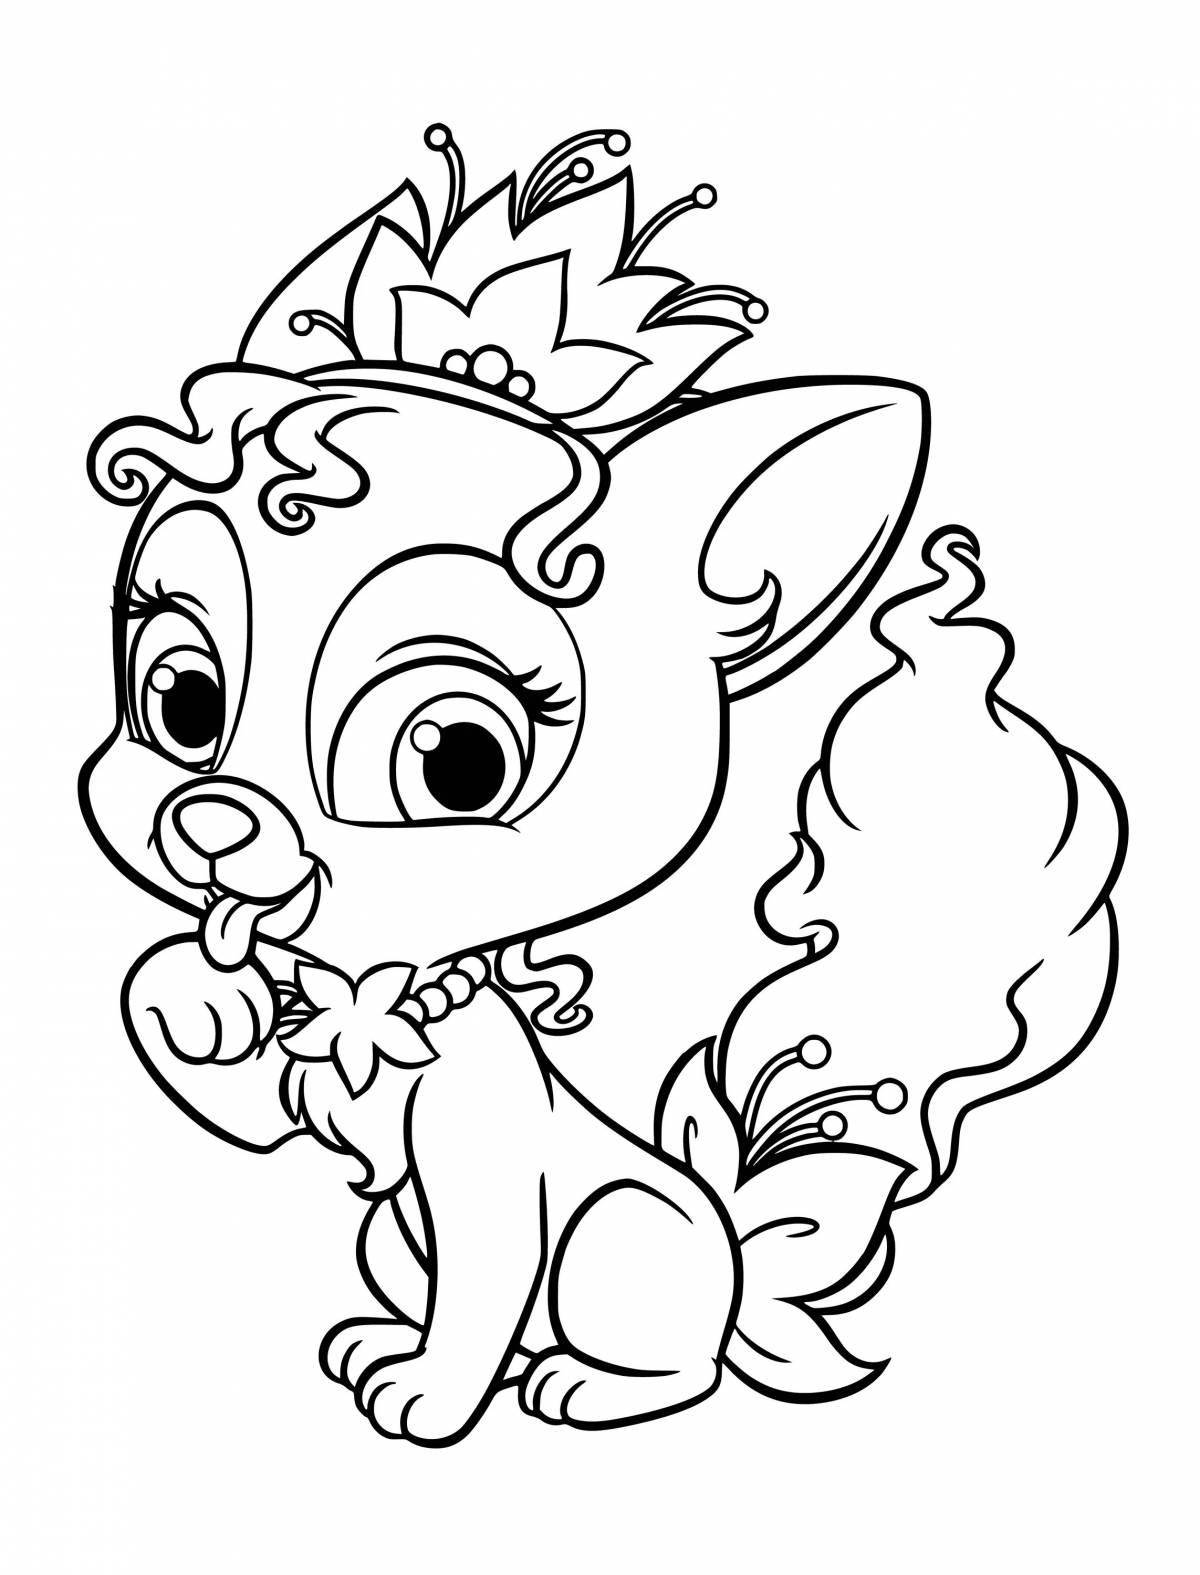 Coloring page adorable animals